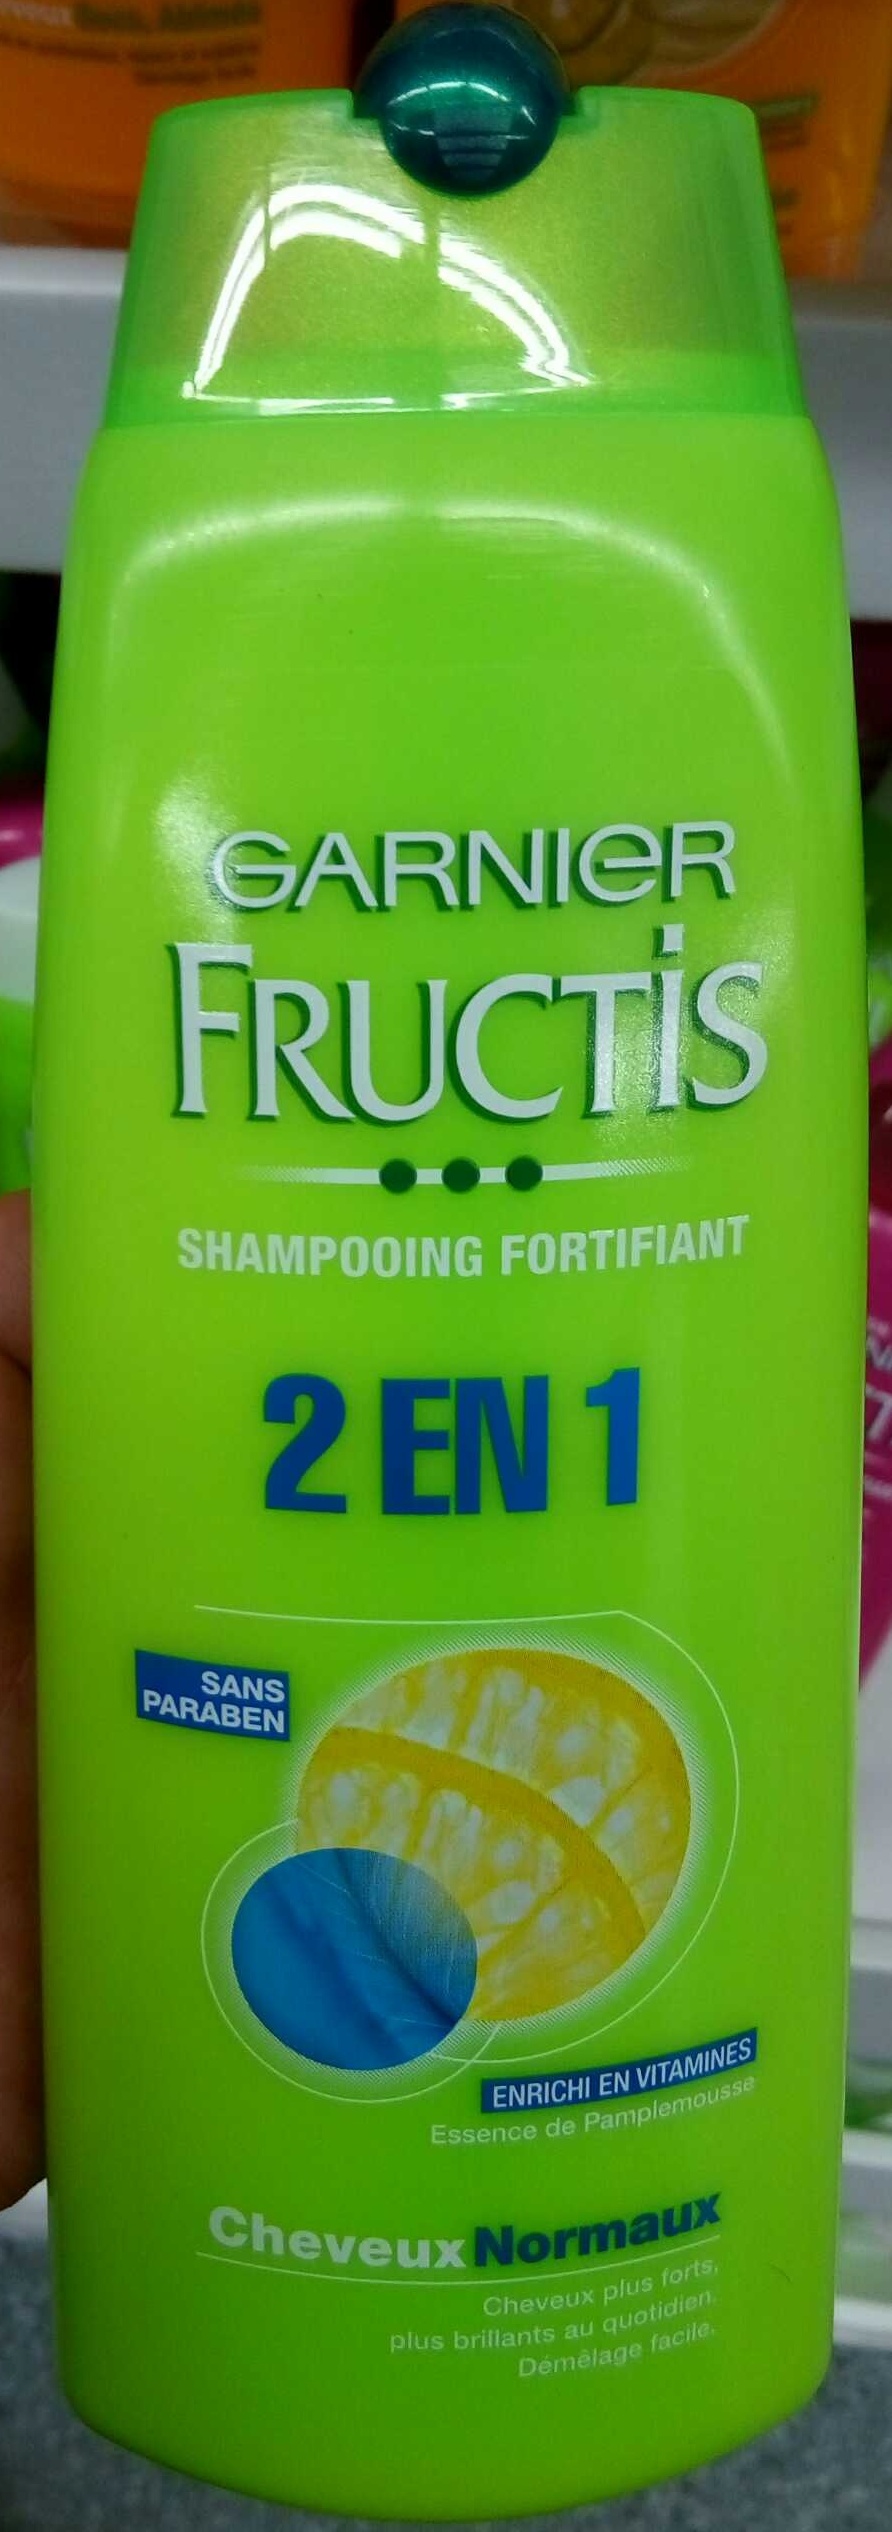 Fructis Shampooing fortifiant 2 en 1 - Tuote - fr